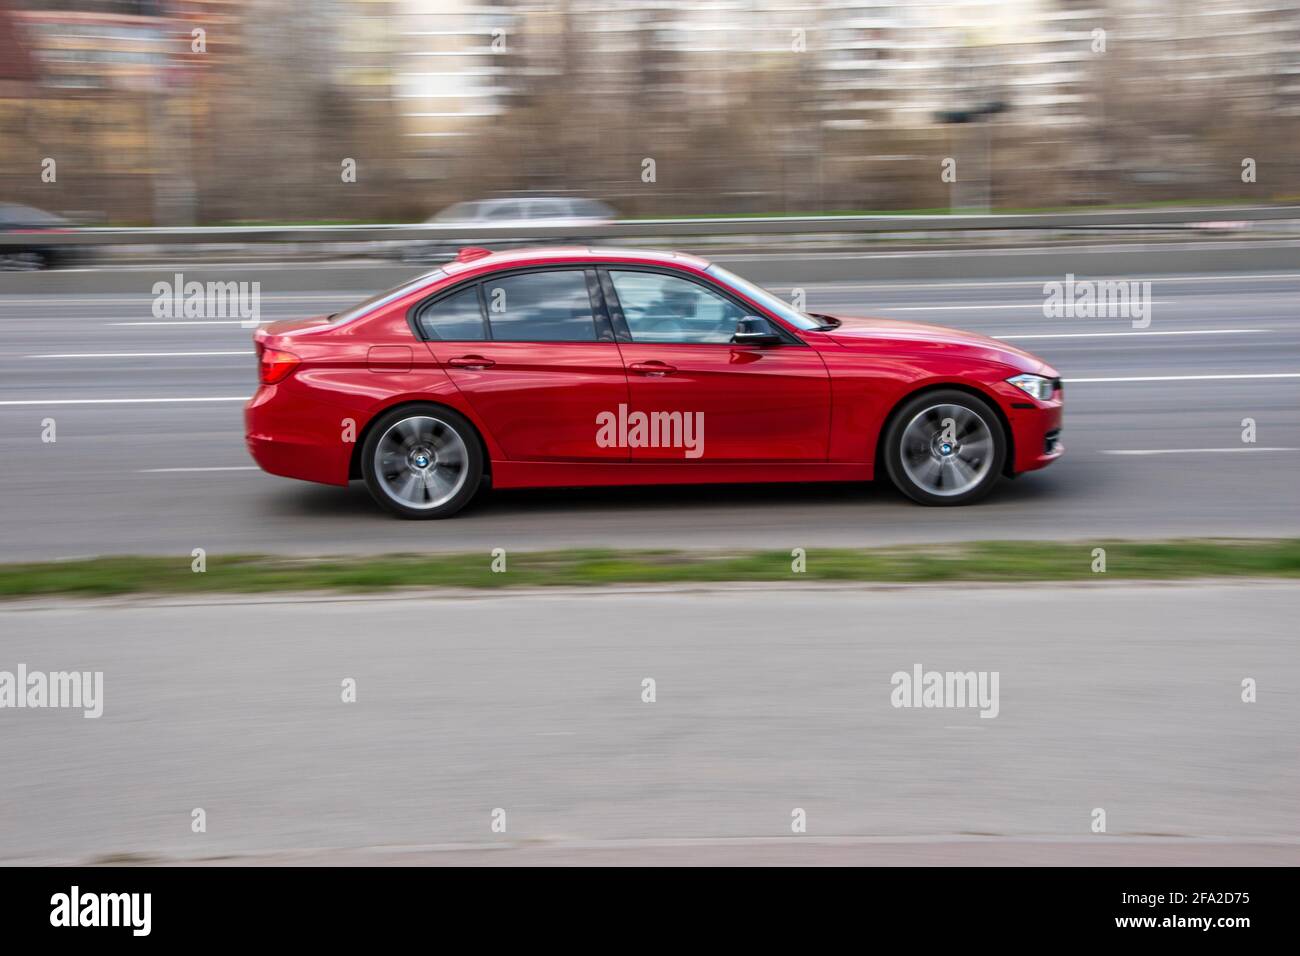 Ukraine, Kyiv - 6 April 2021: Red BMW 3 series car moving on the street. Editorial Stock Photo